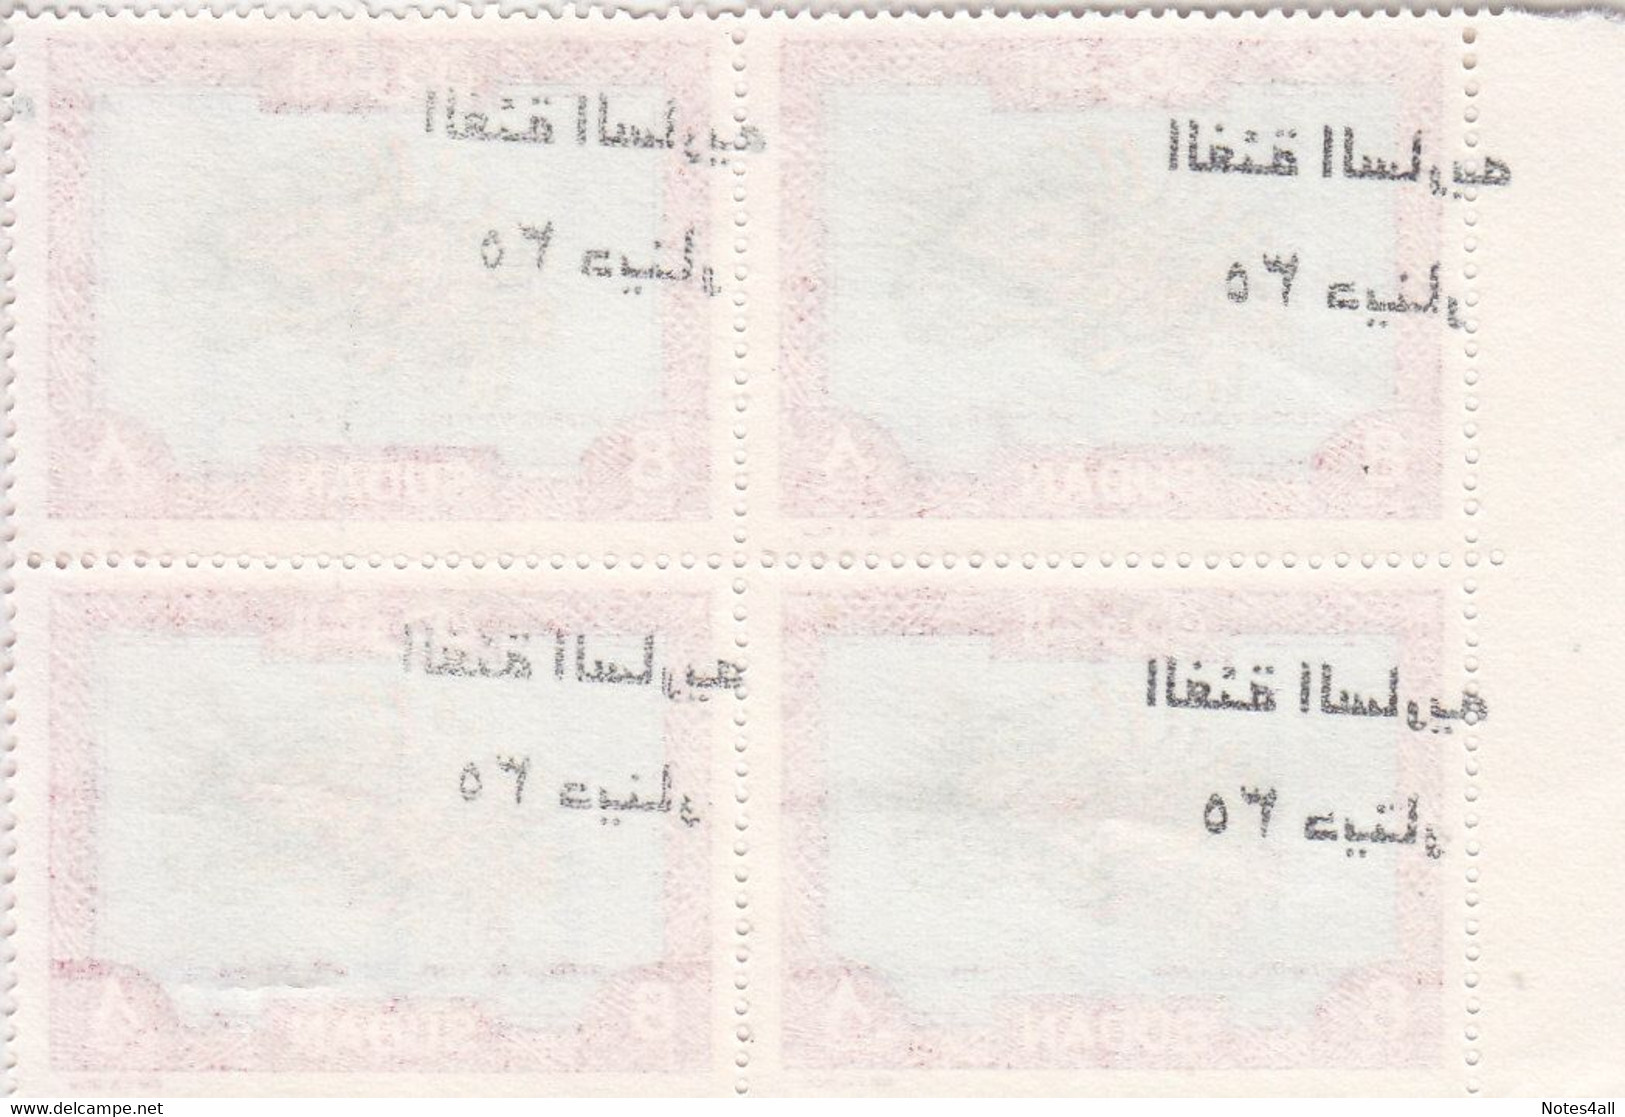 Stamps SUDAN 1992 1997 SC 451 VARIETY ERROR DOUBLED SURCHARGED MNH BLOCK  #136 - Sudan (1954-...)